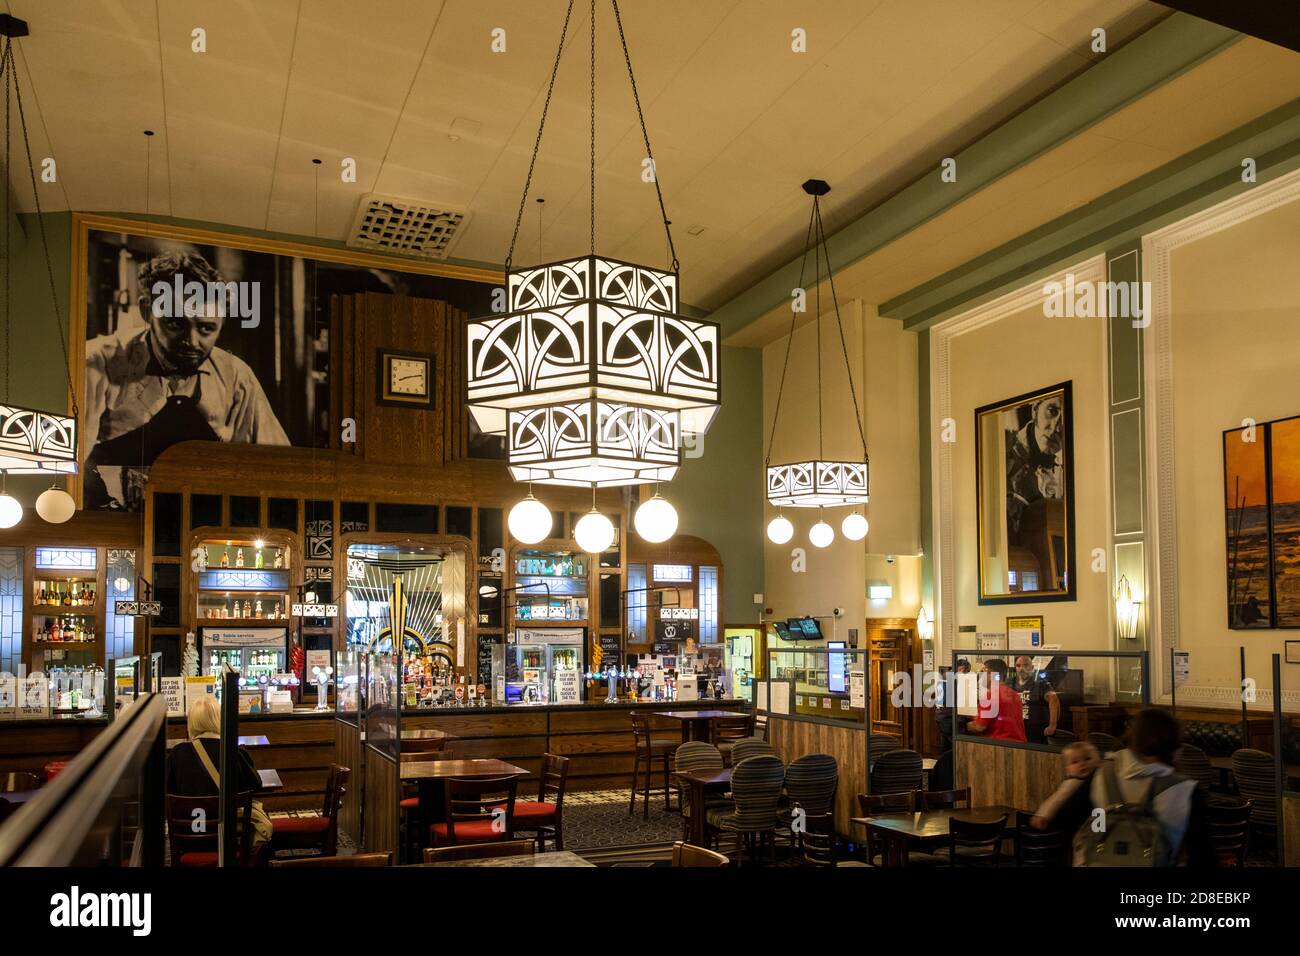 UK, Kent, Whitstable, Oxford Road, Wetherspoon’s The Peter Cushing public house in former cinems, interior Stock Photo